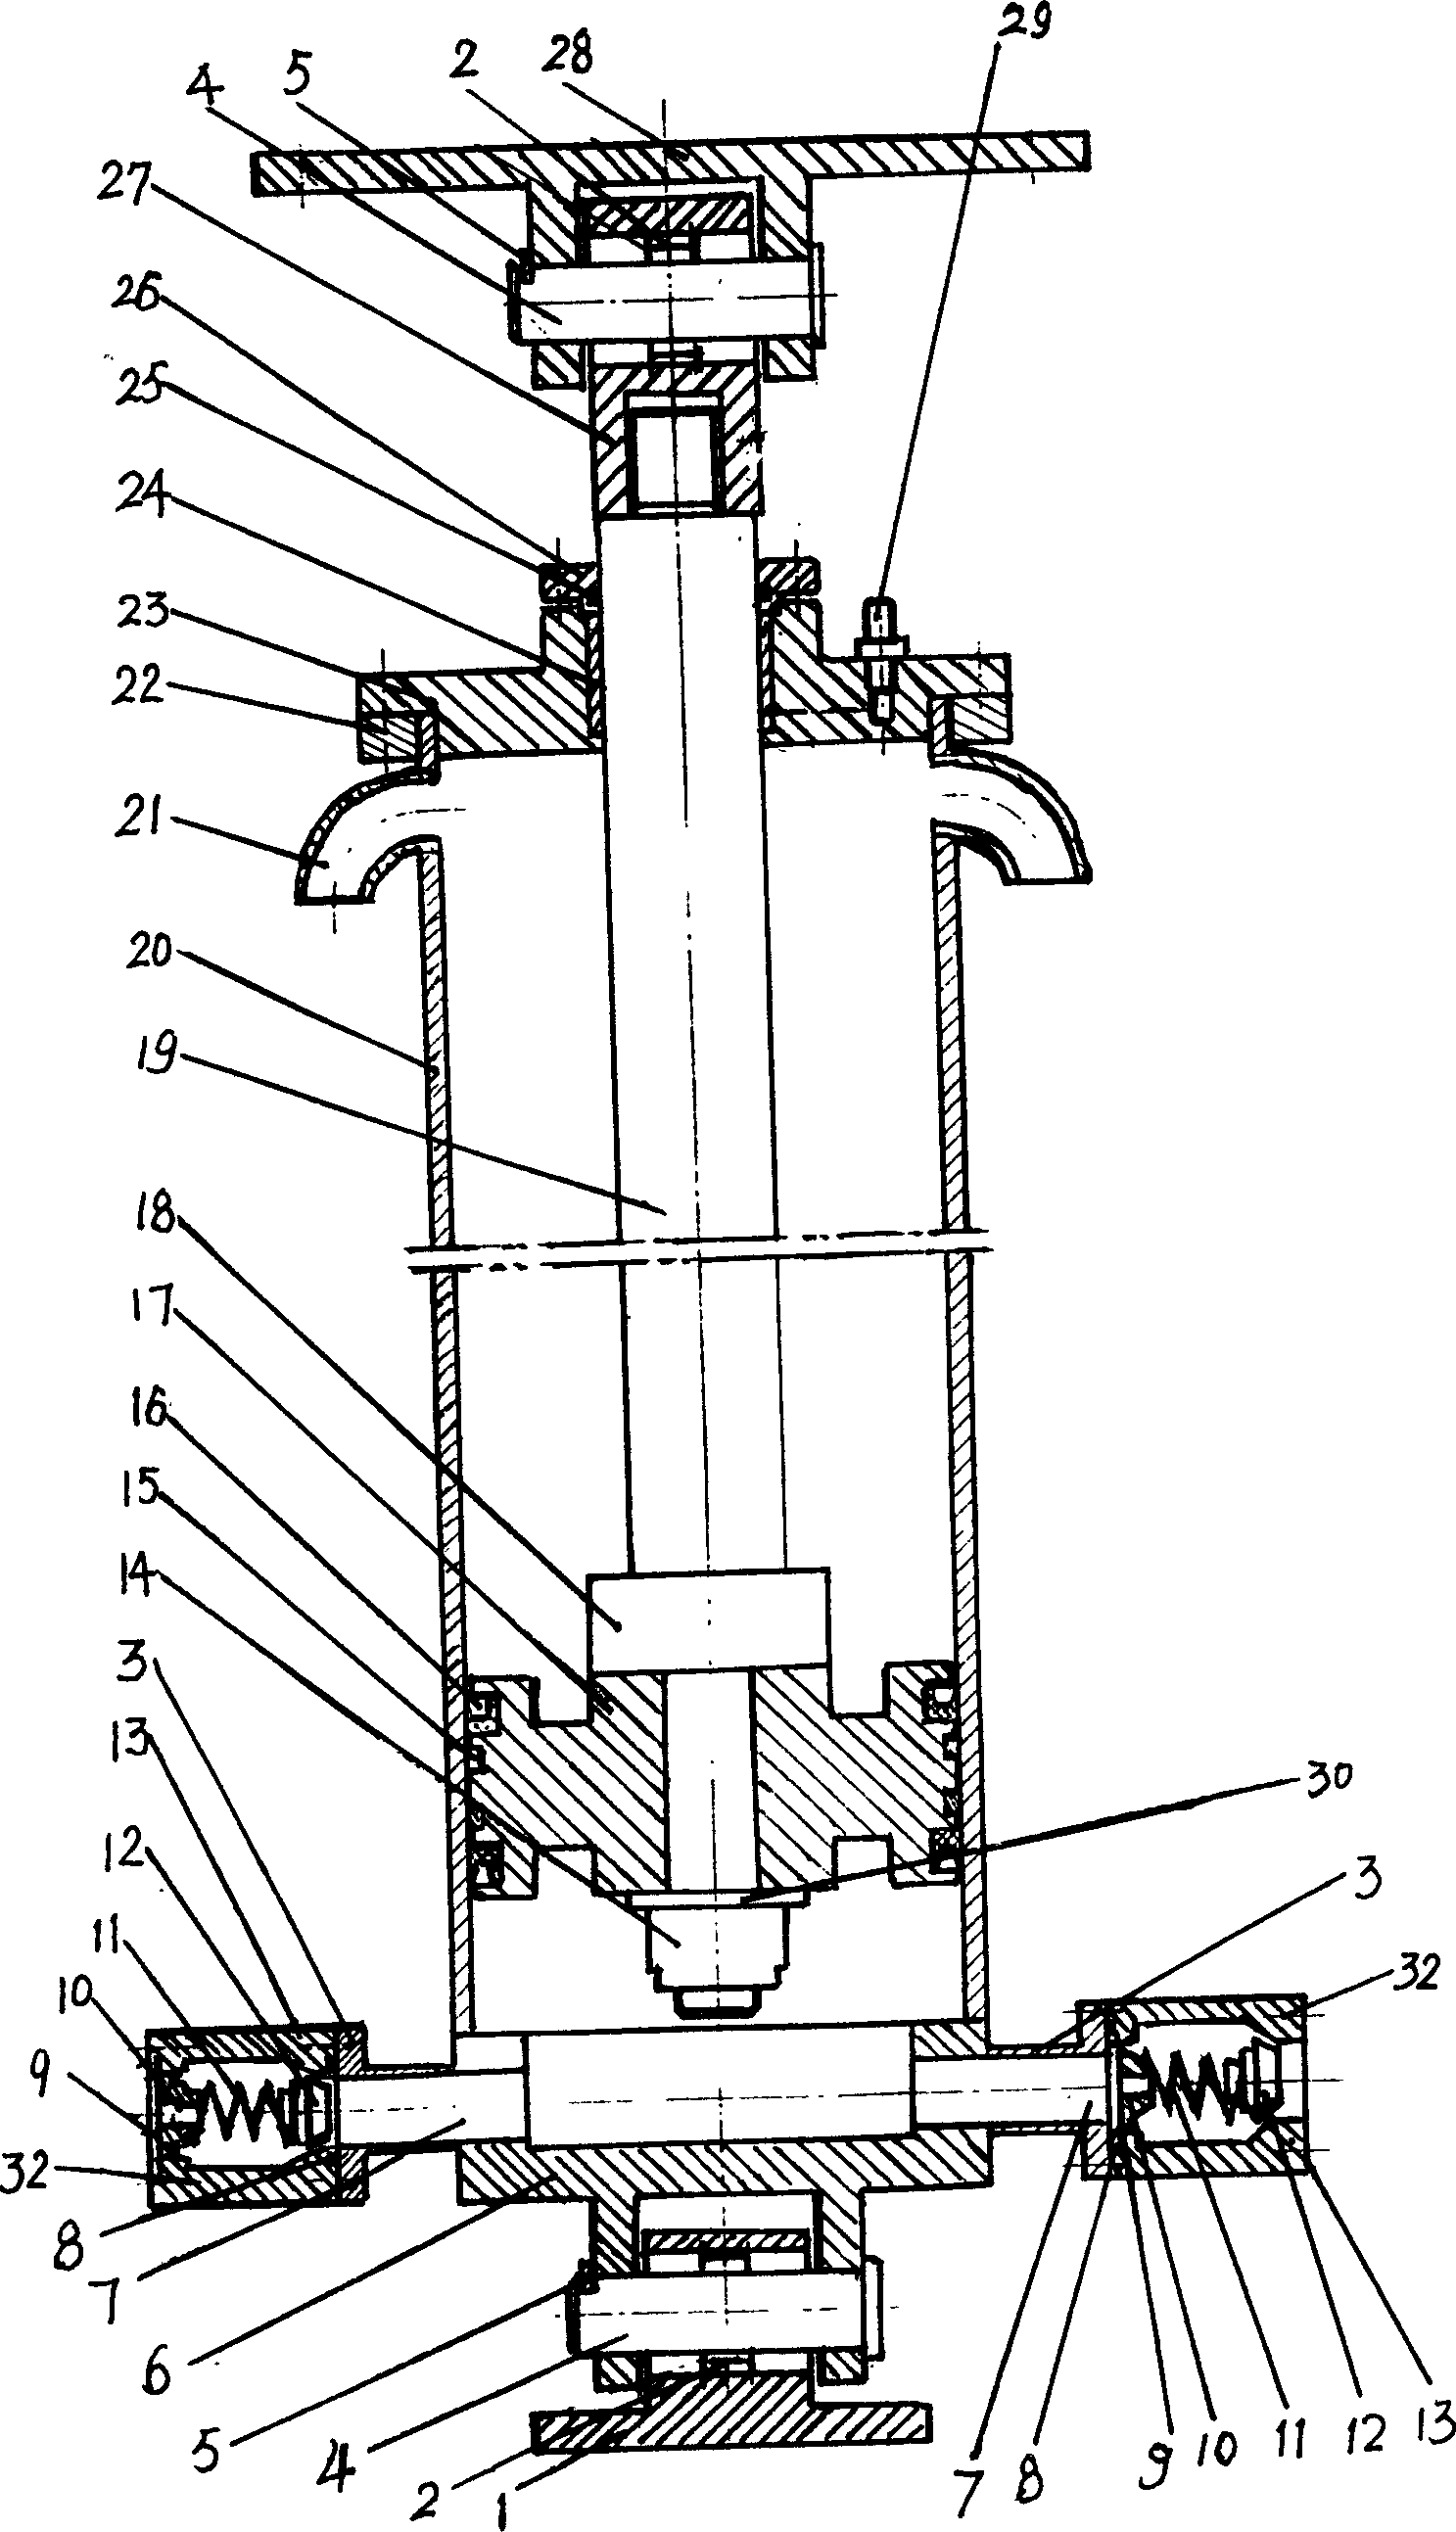 Pressure release device for oil well